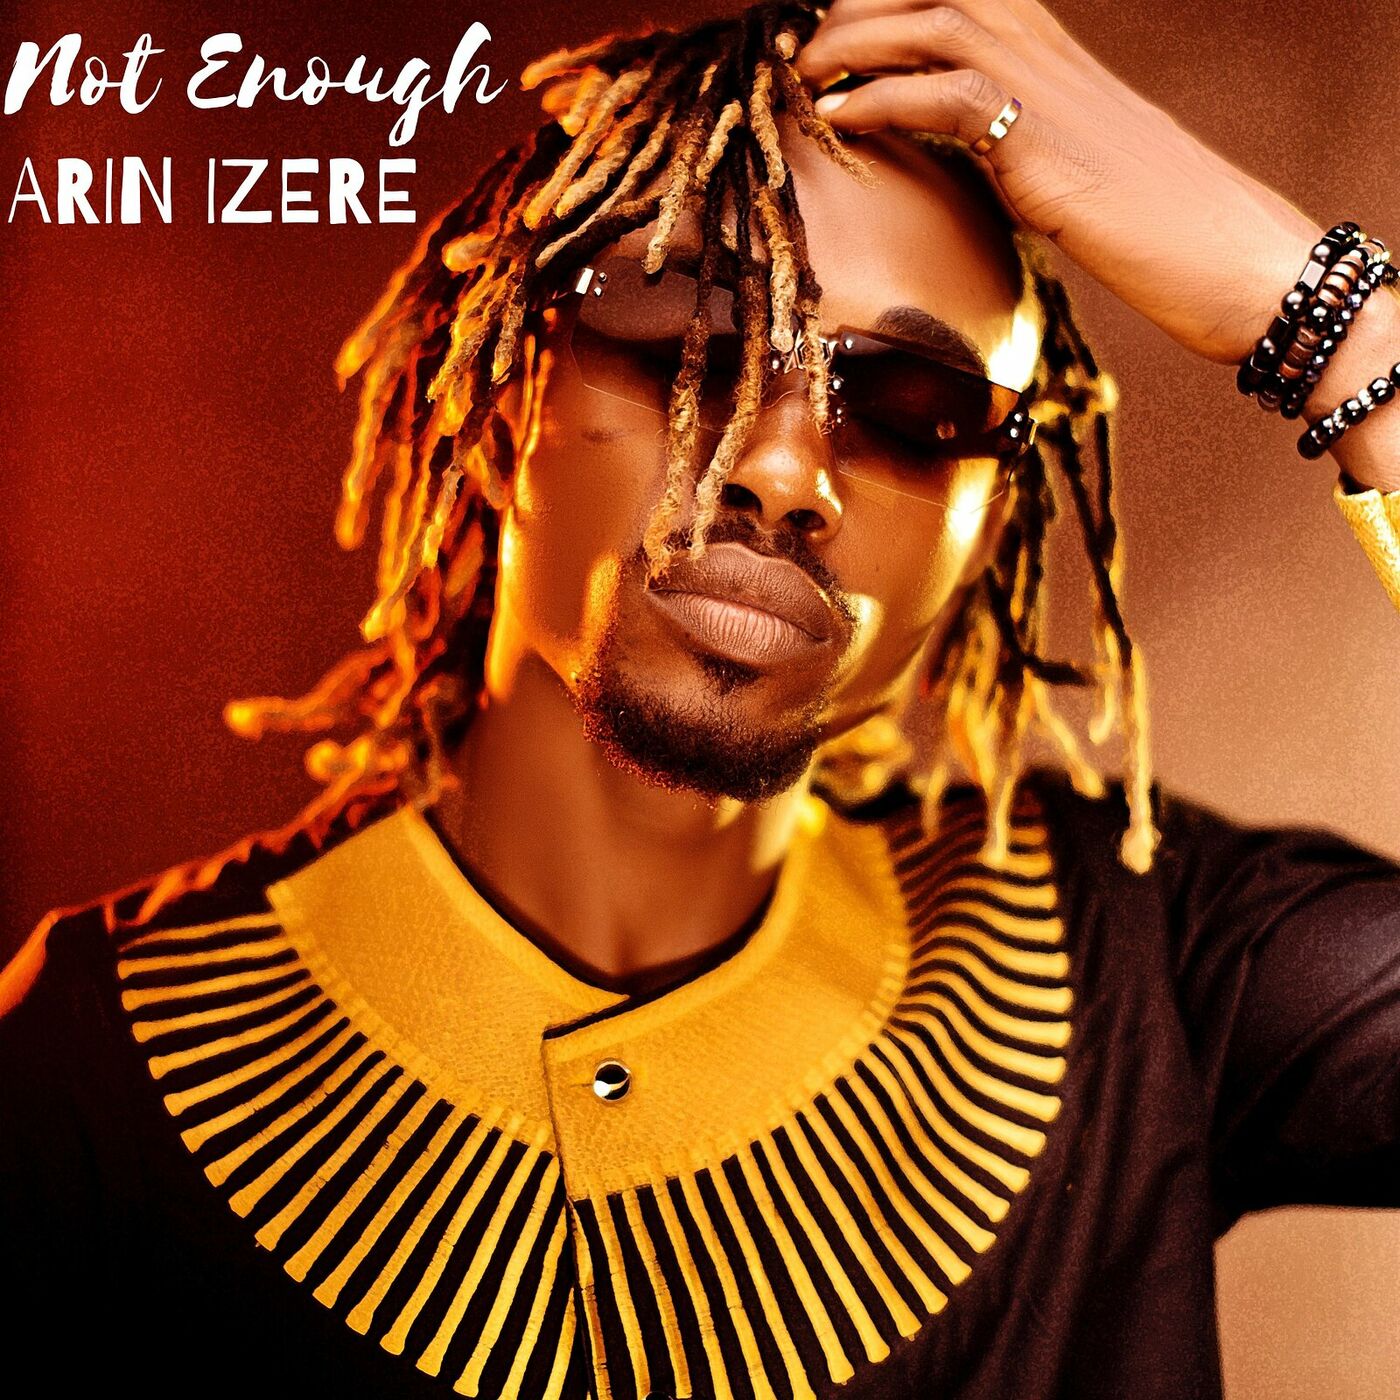 Arin Izere – Not Enough